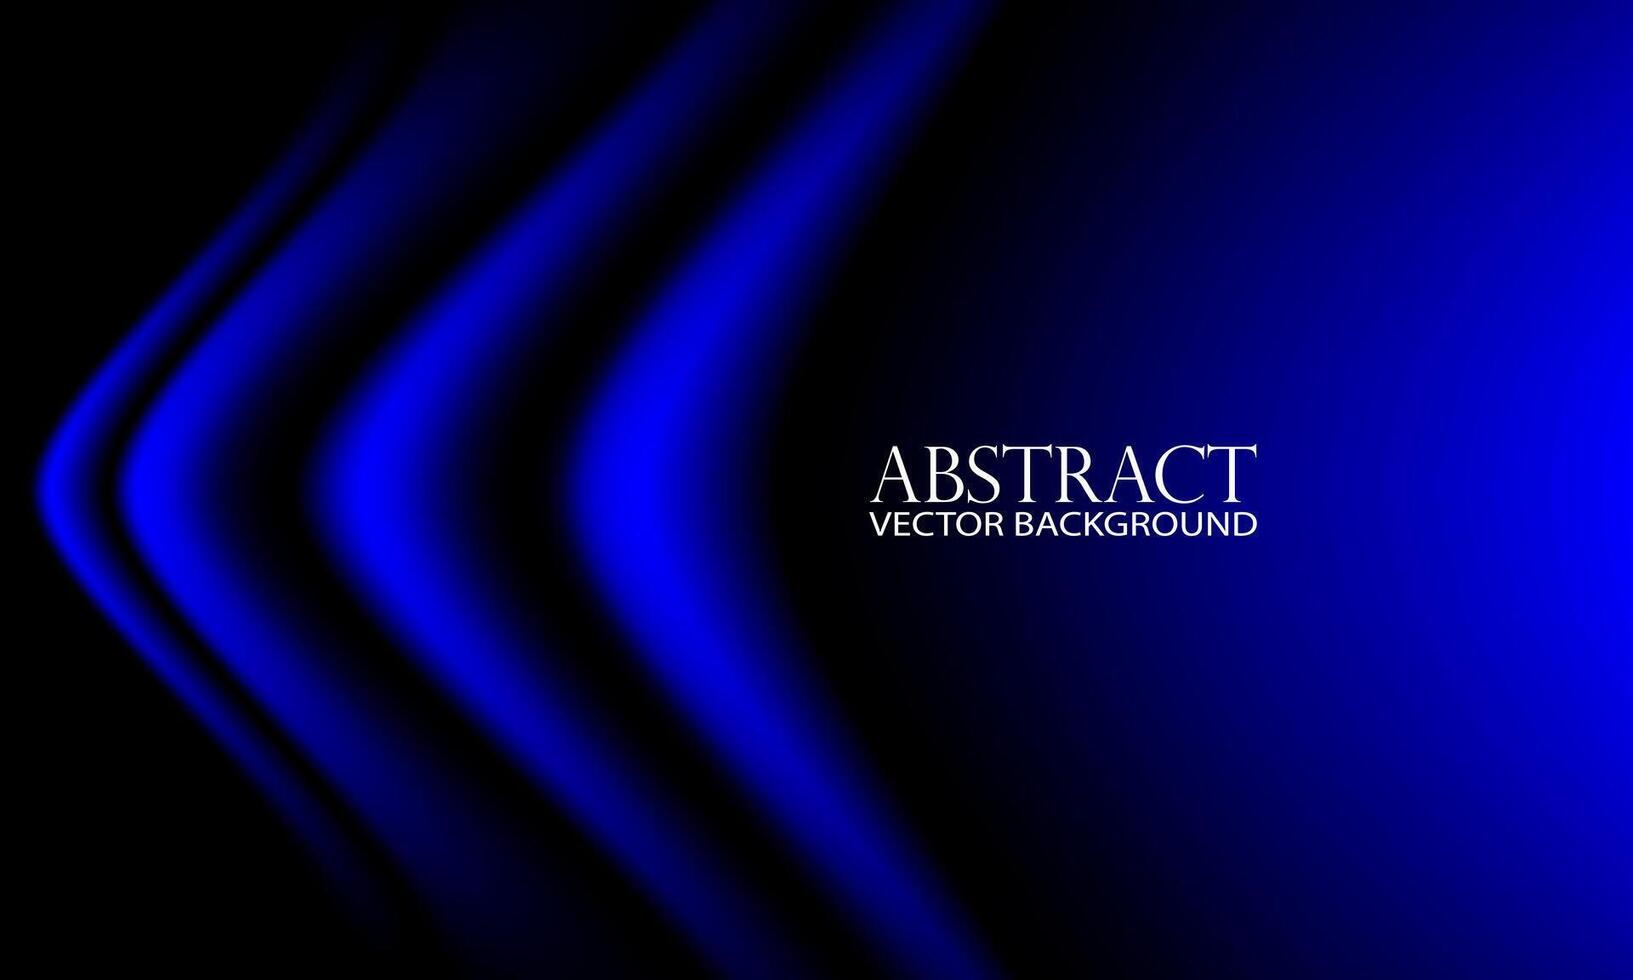 Abstract blue wavy background Vector illustration for wallpaper web